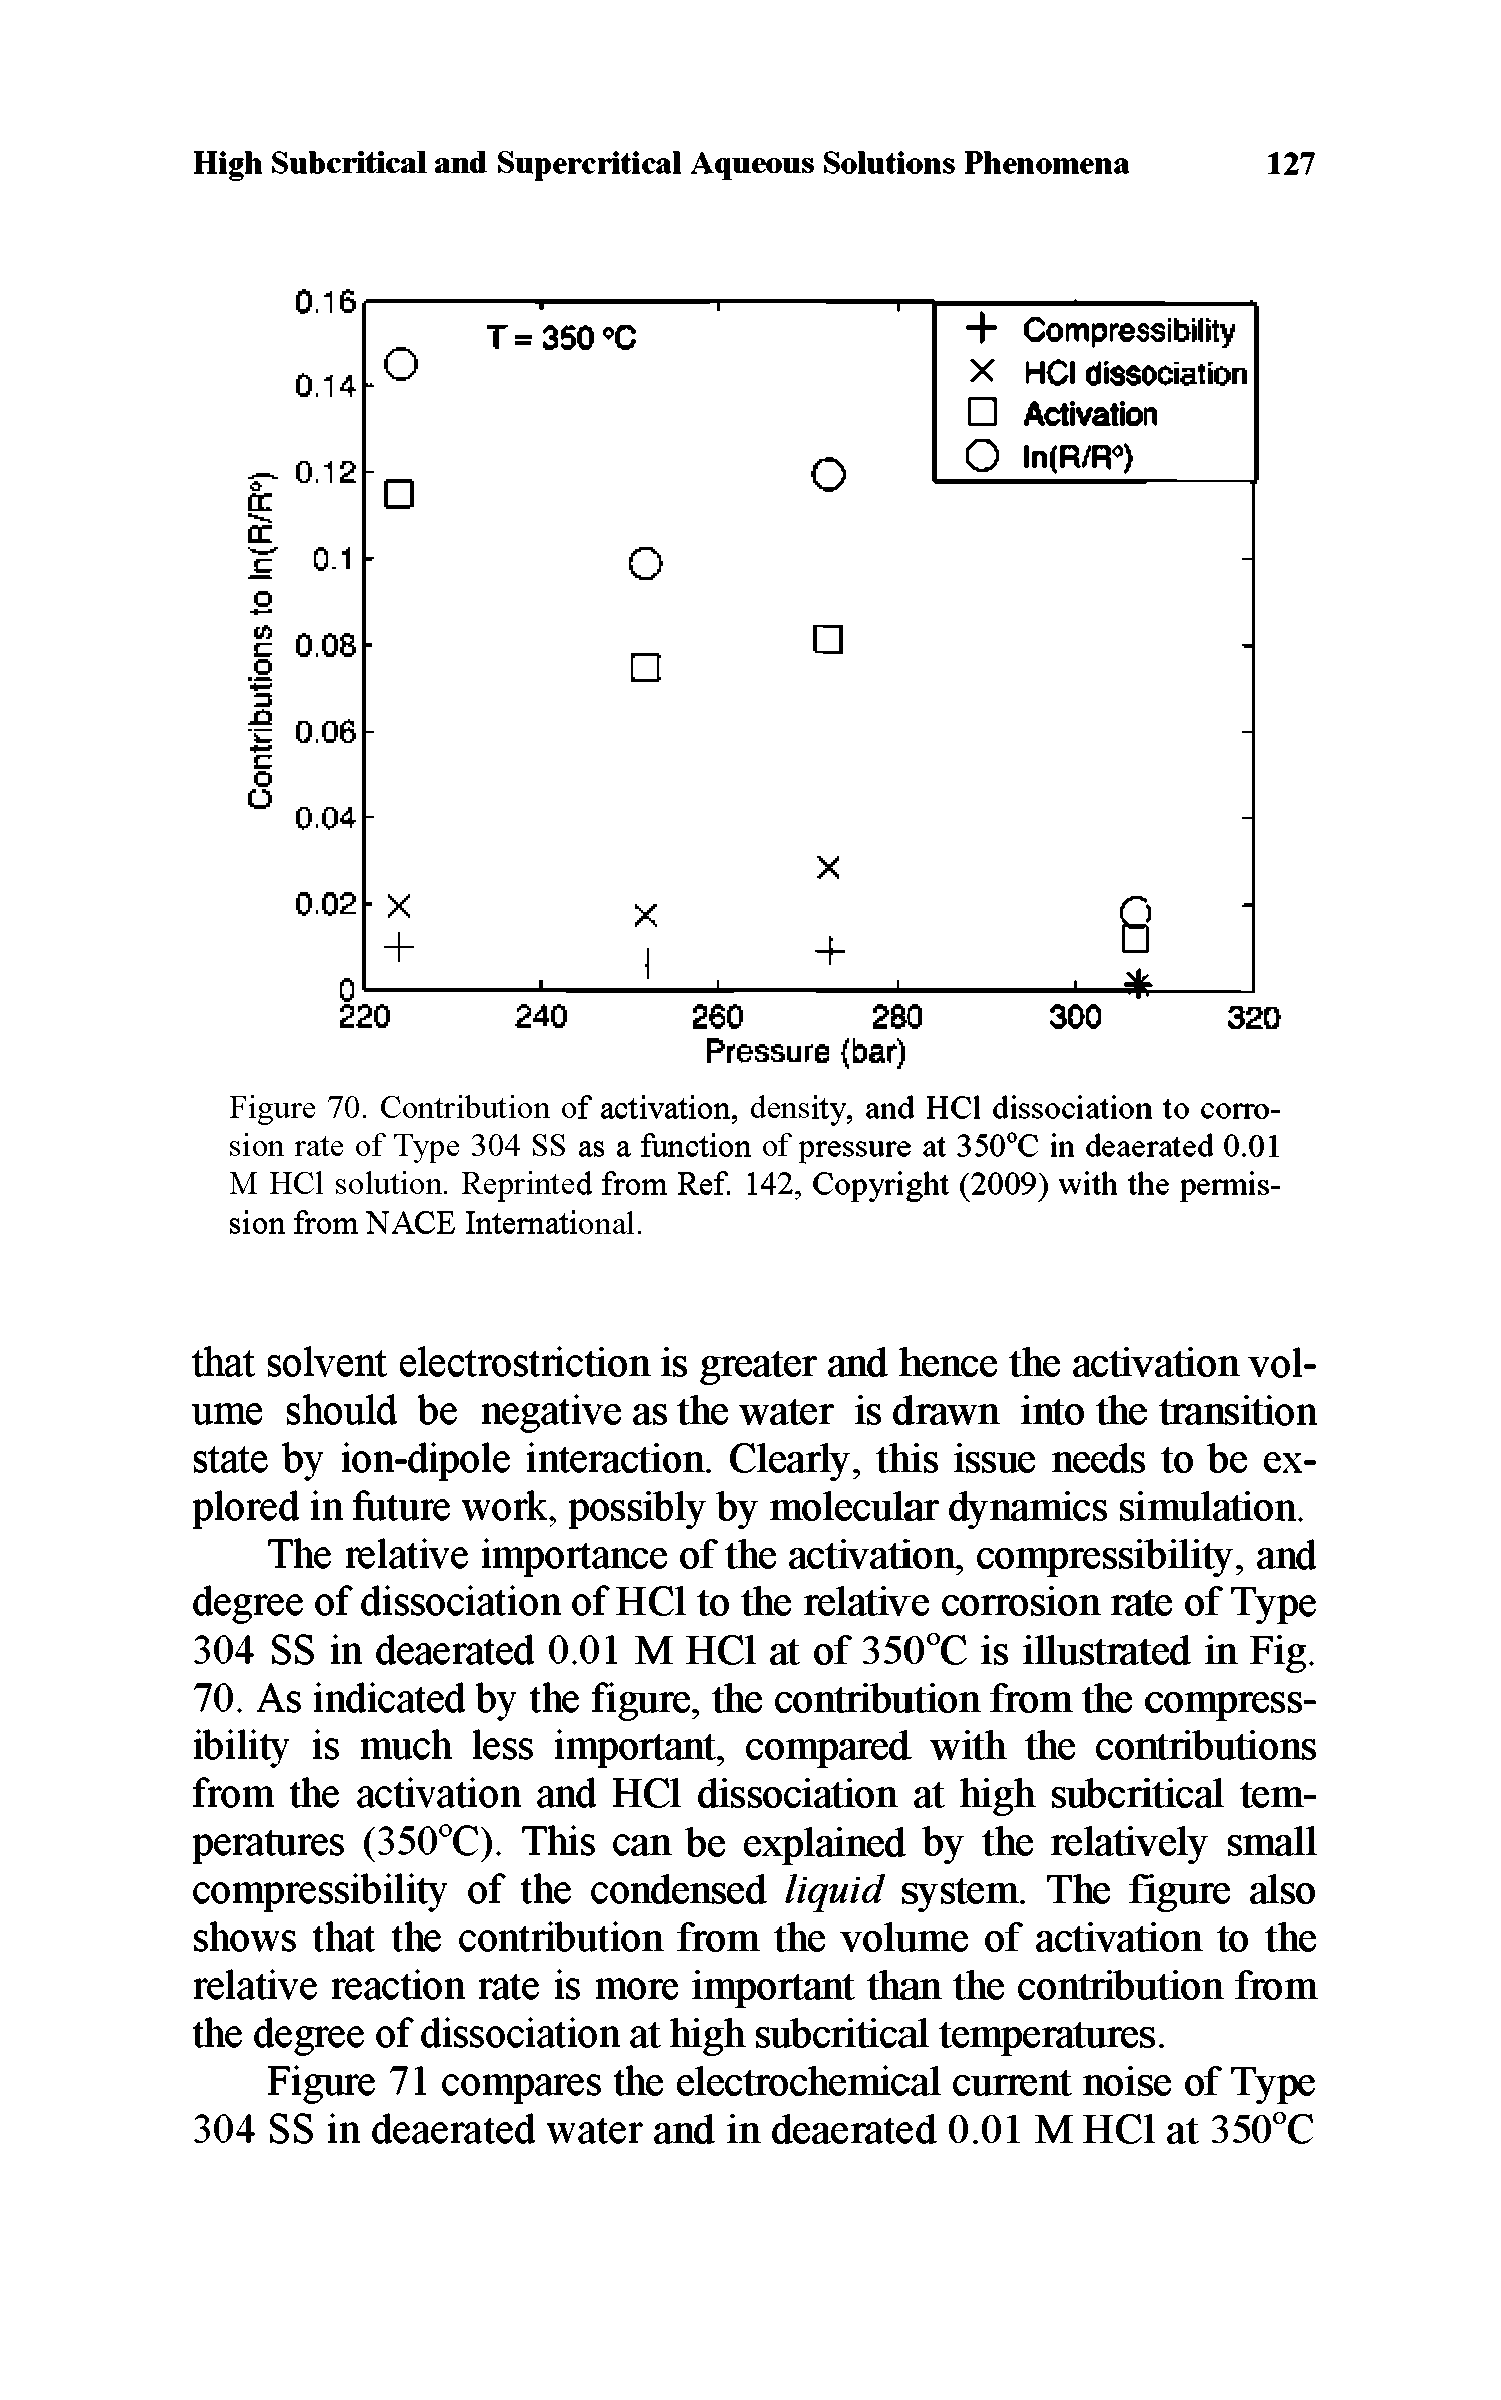 Figure 70. Contribution of activation, density, and HCl dissociation to corrosion rate of Type 304 SS as a function of pressure at 350°C in deaerated 0.01 M FICl solution. Reprinted from Ref 142, Copyright (2009) with the permission from NACE International.